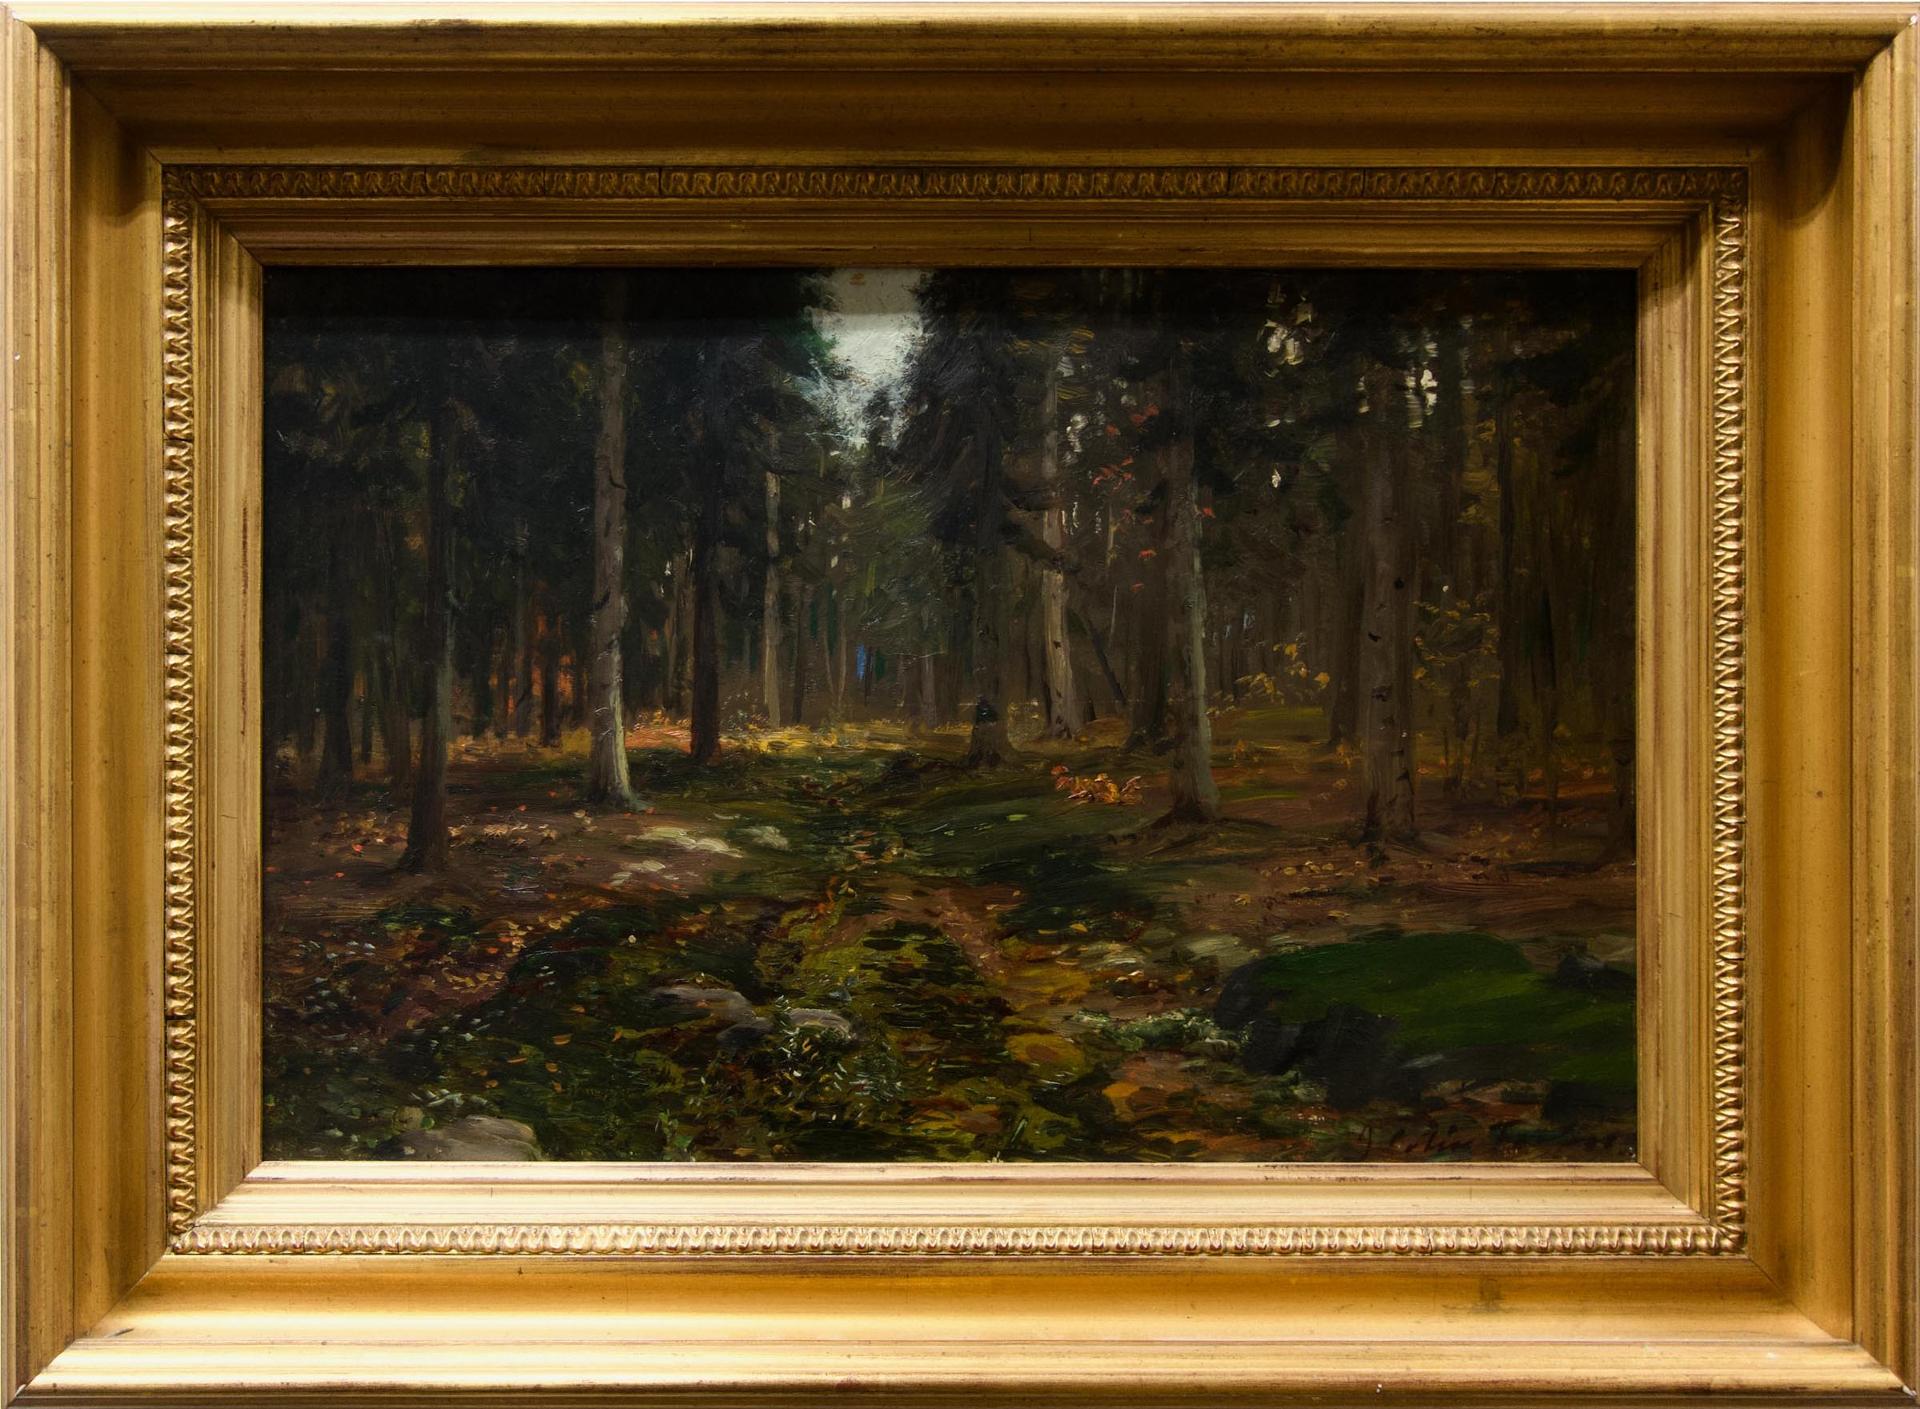 John Colin Forbes (1846-1925) - Untitled (Woodland Study)